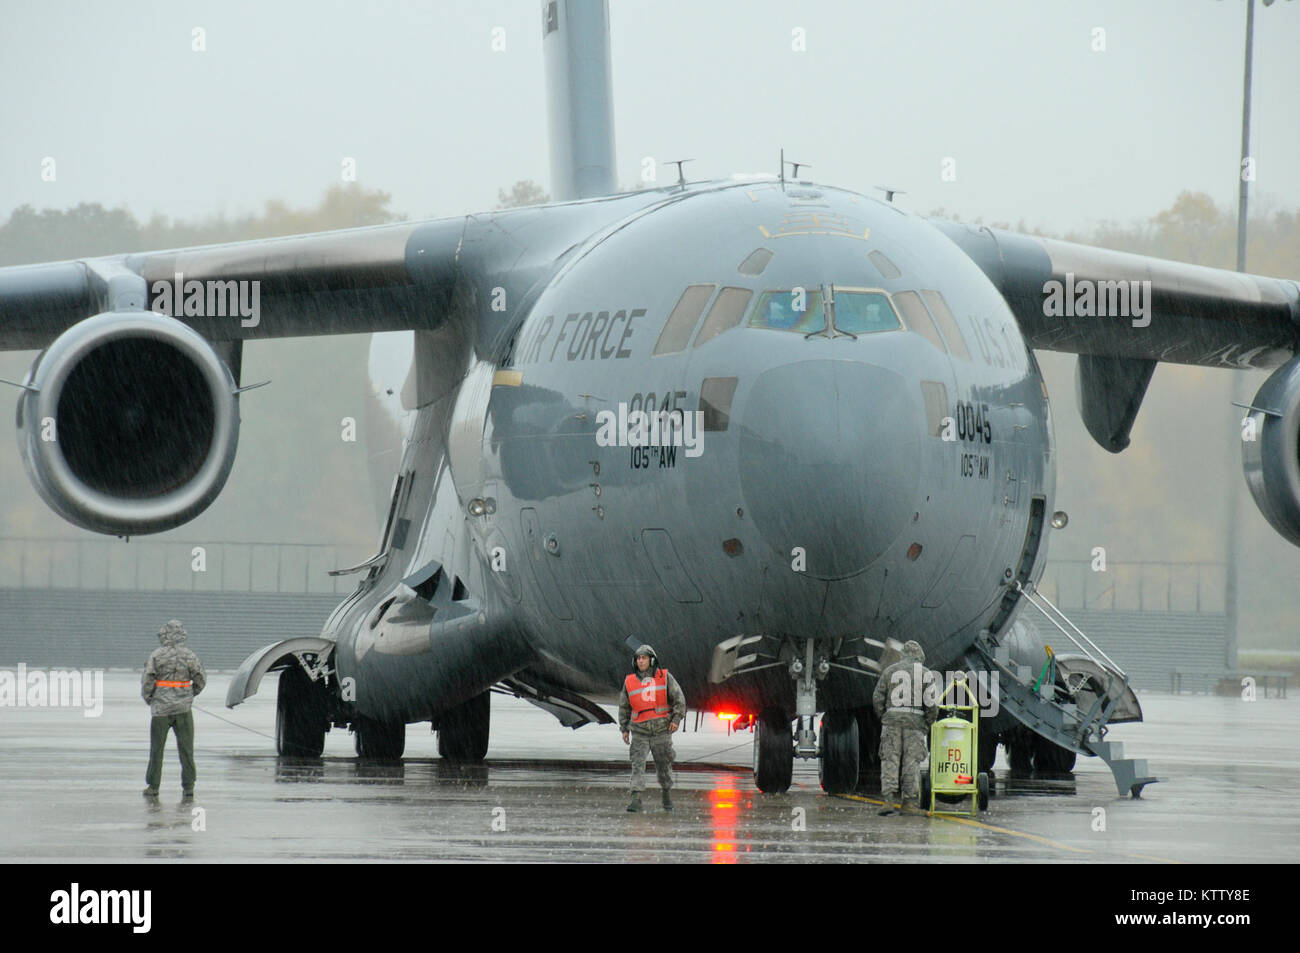 STEWART ANGB NEWBURGH, N.Y. -105th maintainers preflight a 17 Globemaster III in the rain for a late morning flight Oct. 19, 2012.  (National Guard photo by Tech. Sgt. Michael OHalloran) (Released) Stock Photo